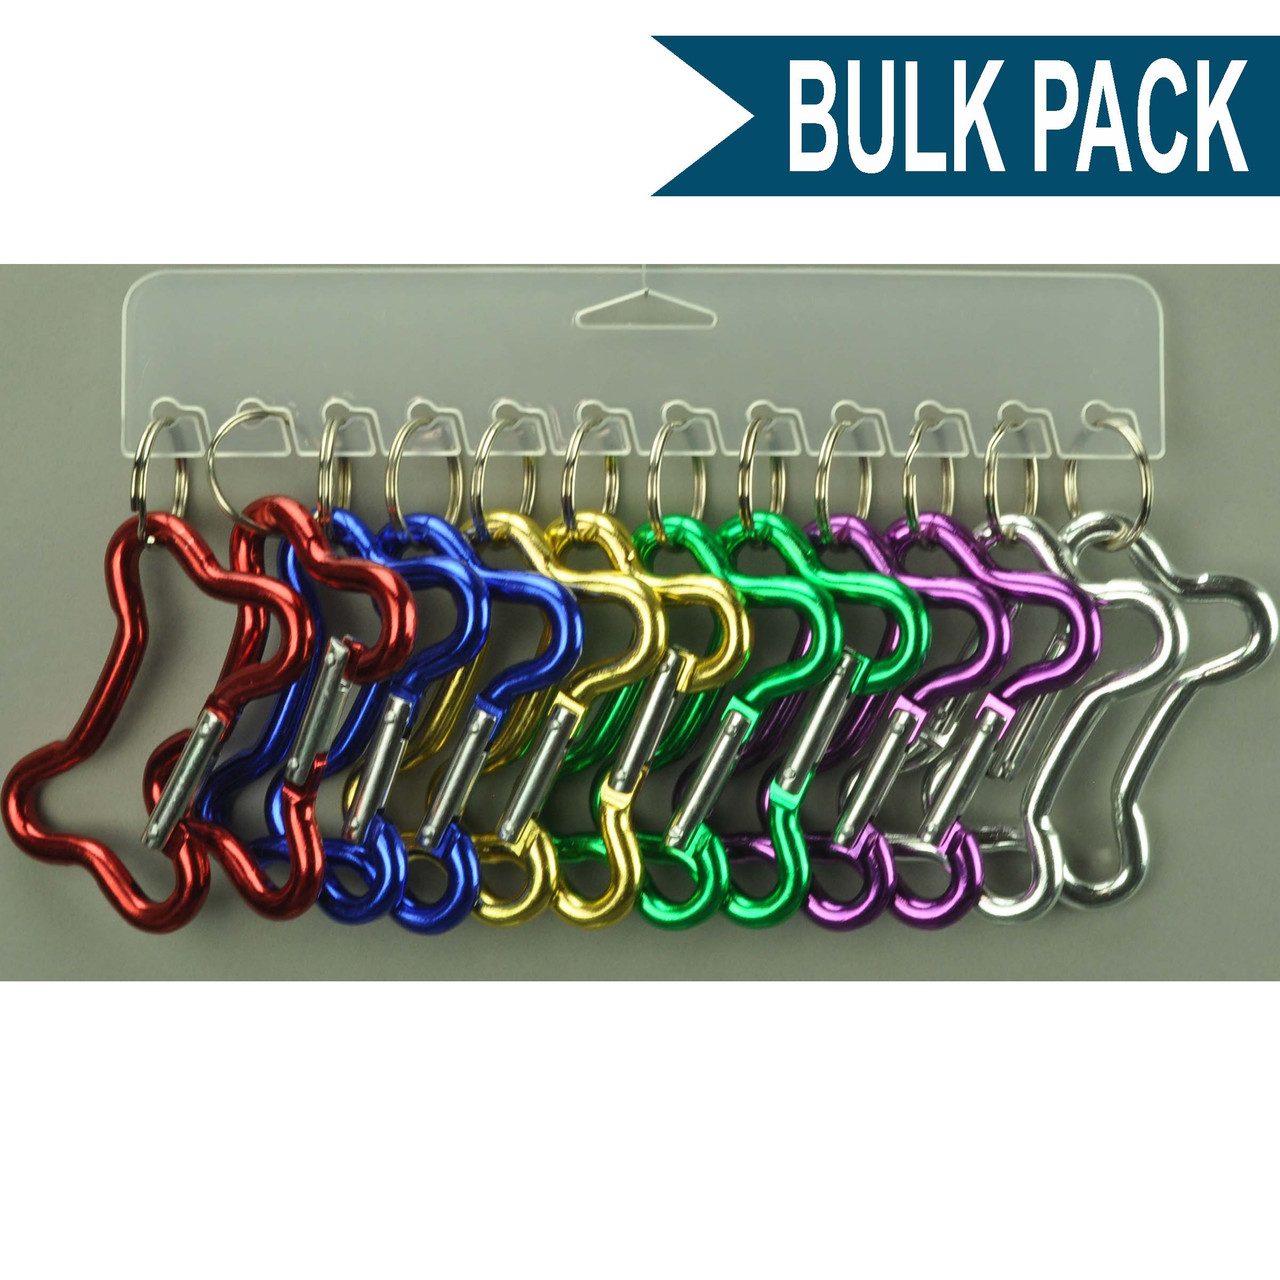 Shop for and Buy Dog Bone Shape Carabiner Clip Keychain - Bulk Pack at  . Large selection and bulk discounts available.